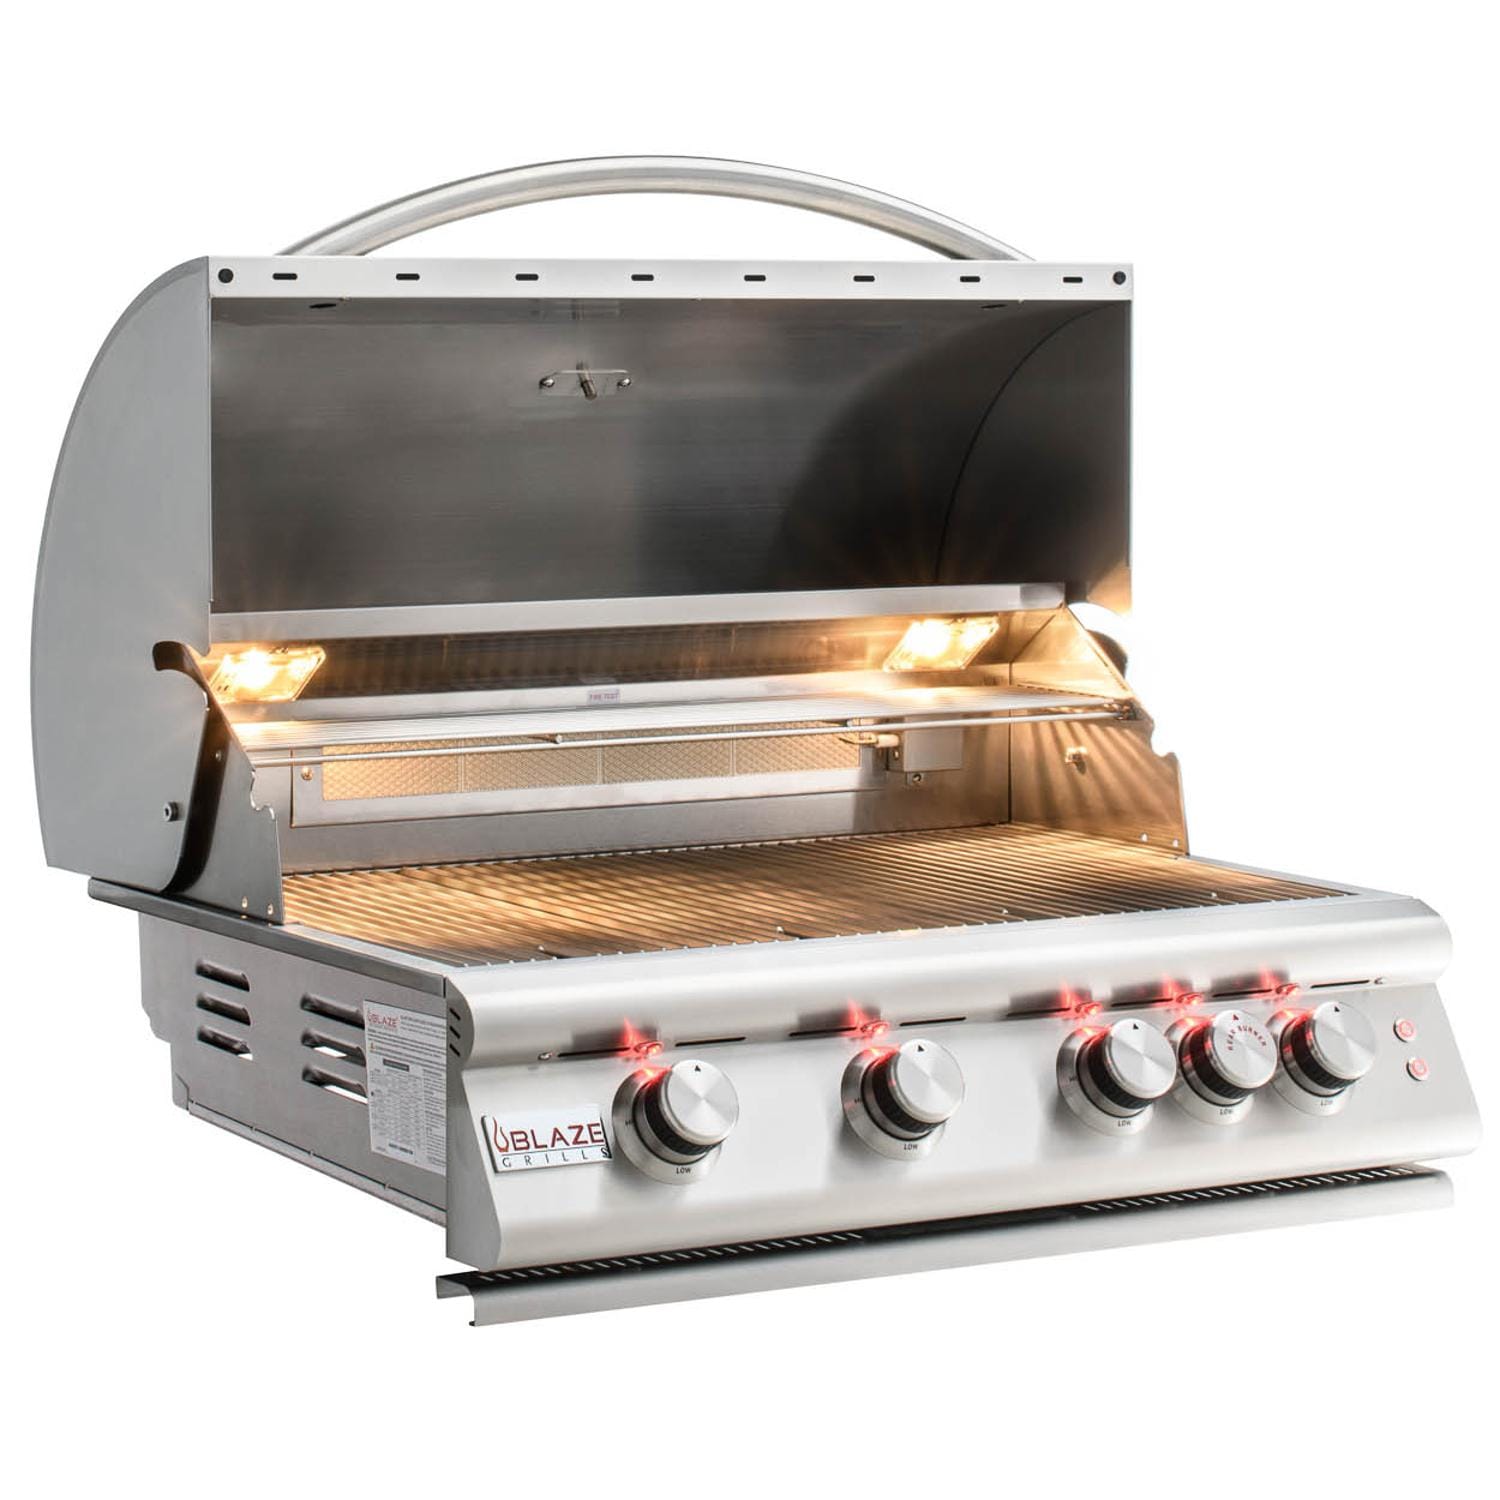 Blaze Marine Grade Stainless Steel Built-In Natural Gas Grill with Lights, 32" - image 1 of 6